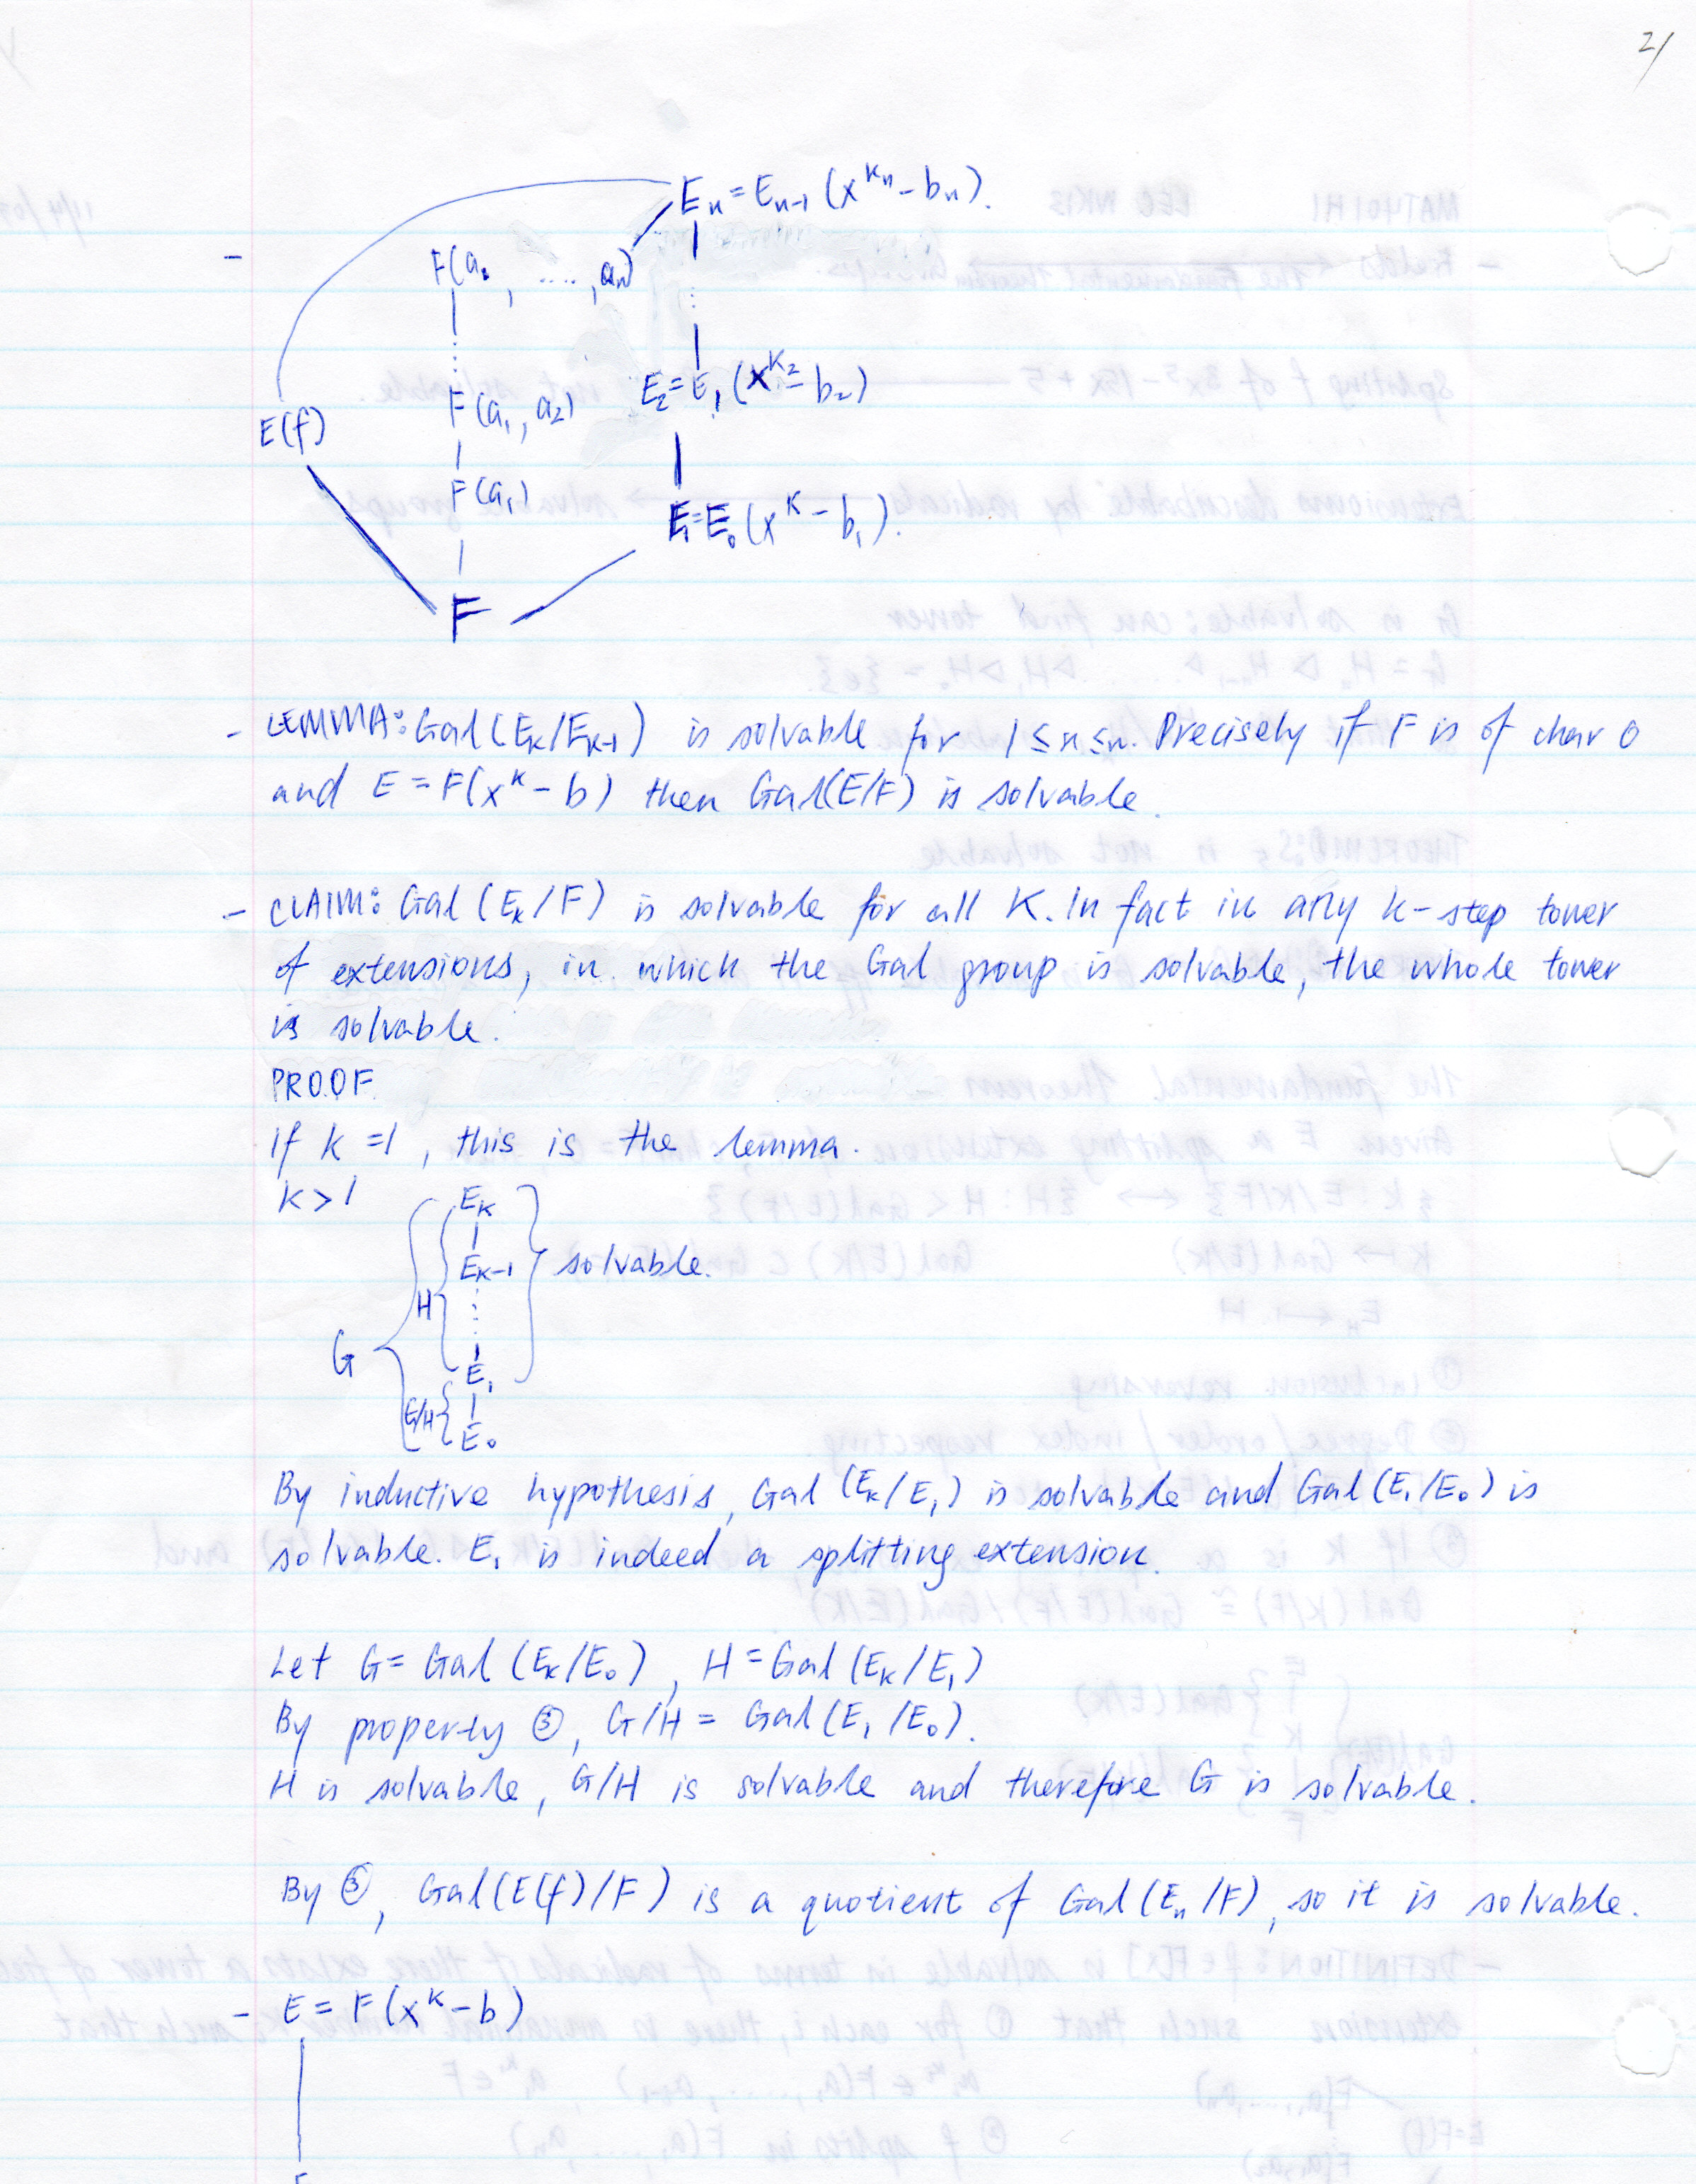 07-401 lecture 13 pg 2.jpg